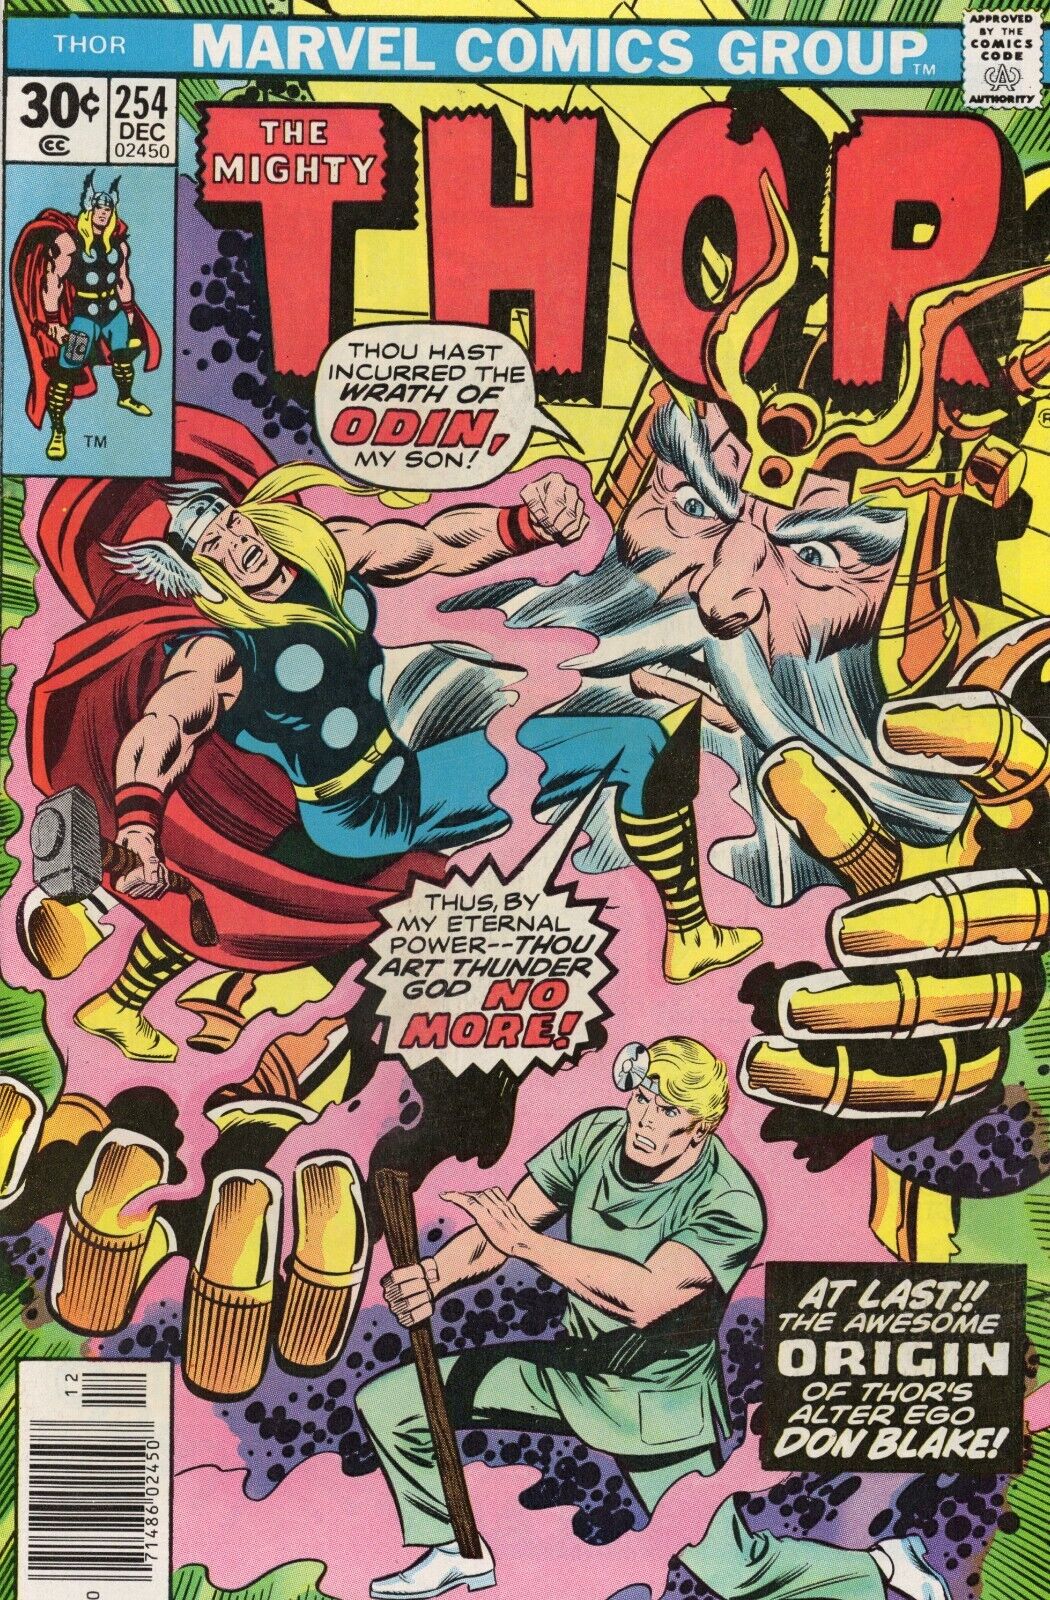 The Mighty Thor #254 1976 VF